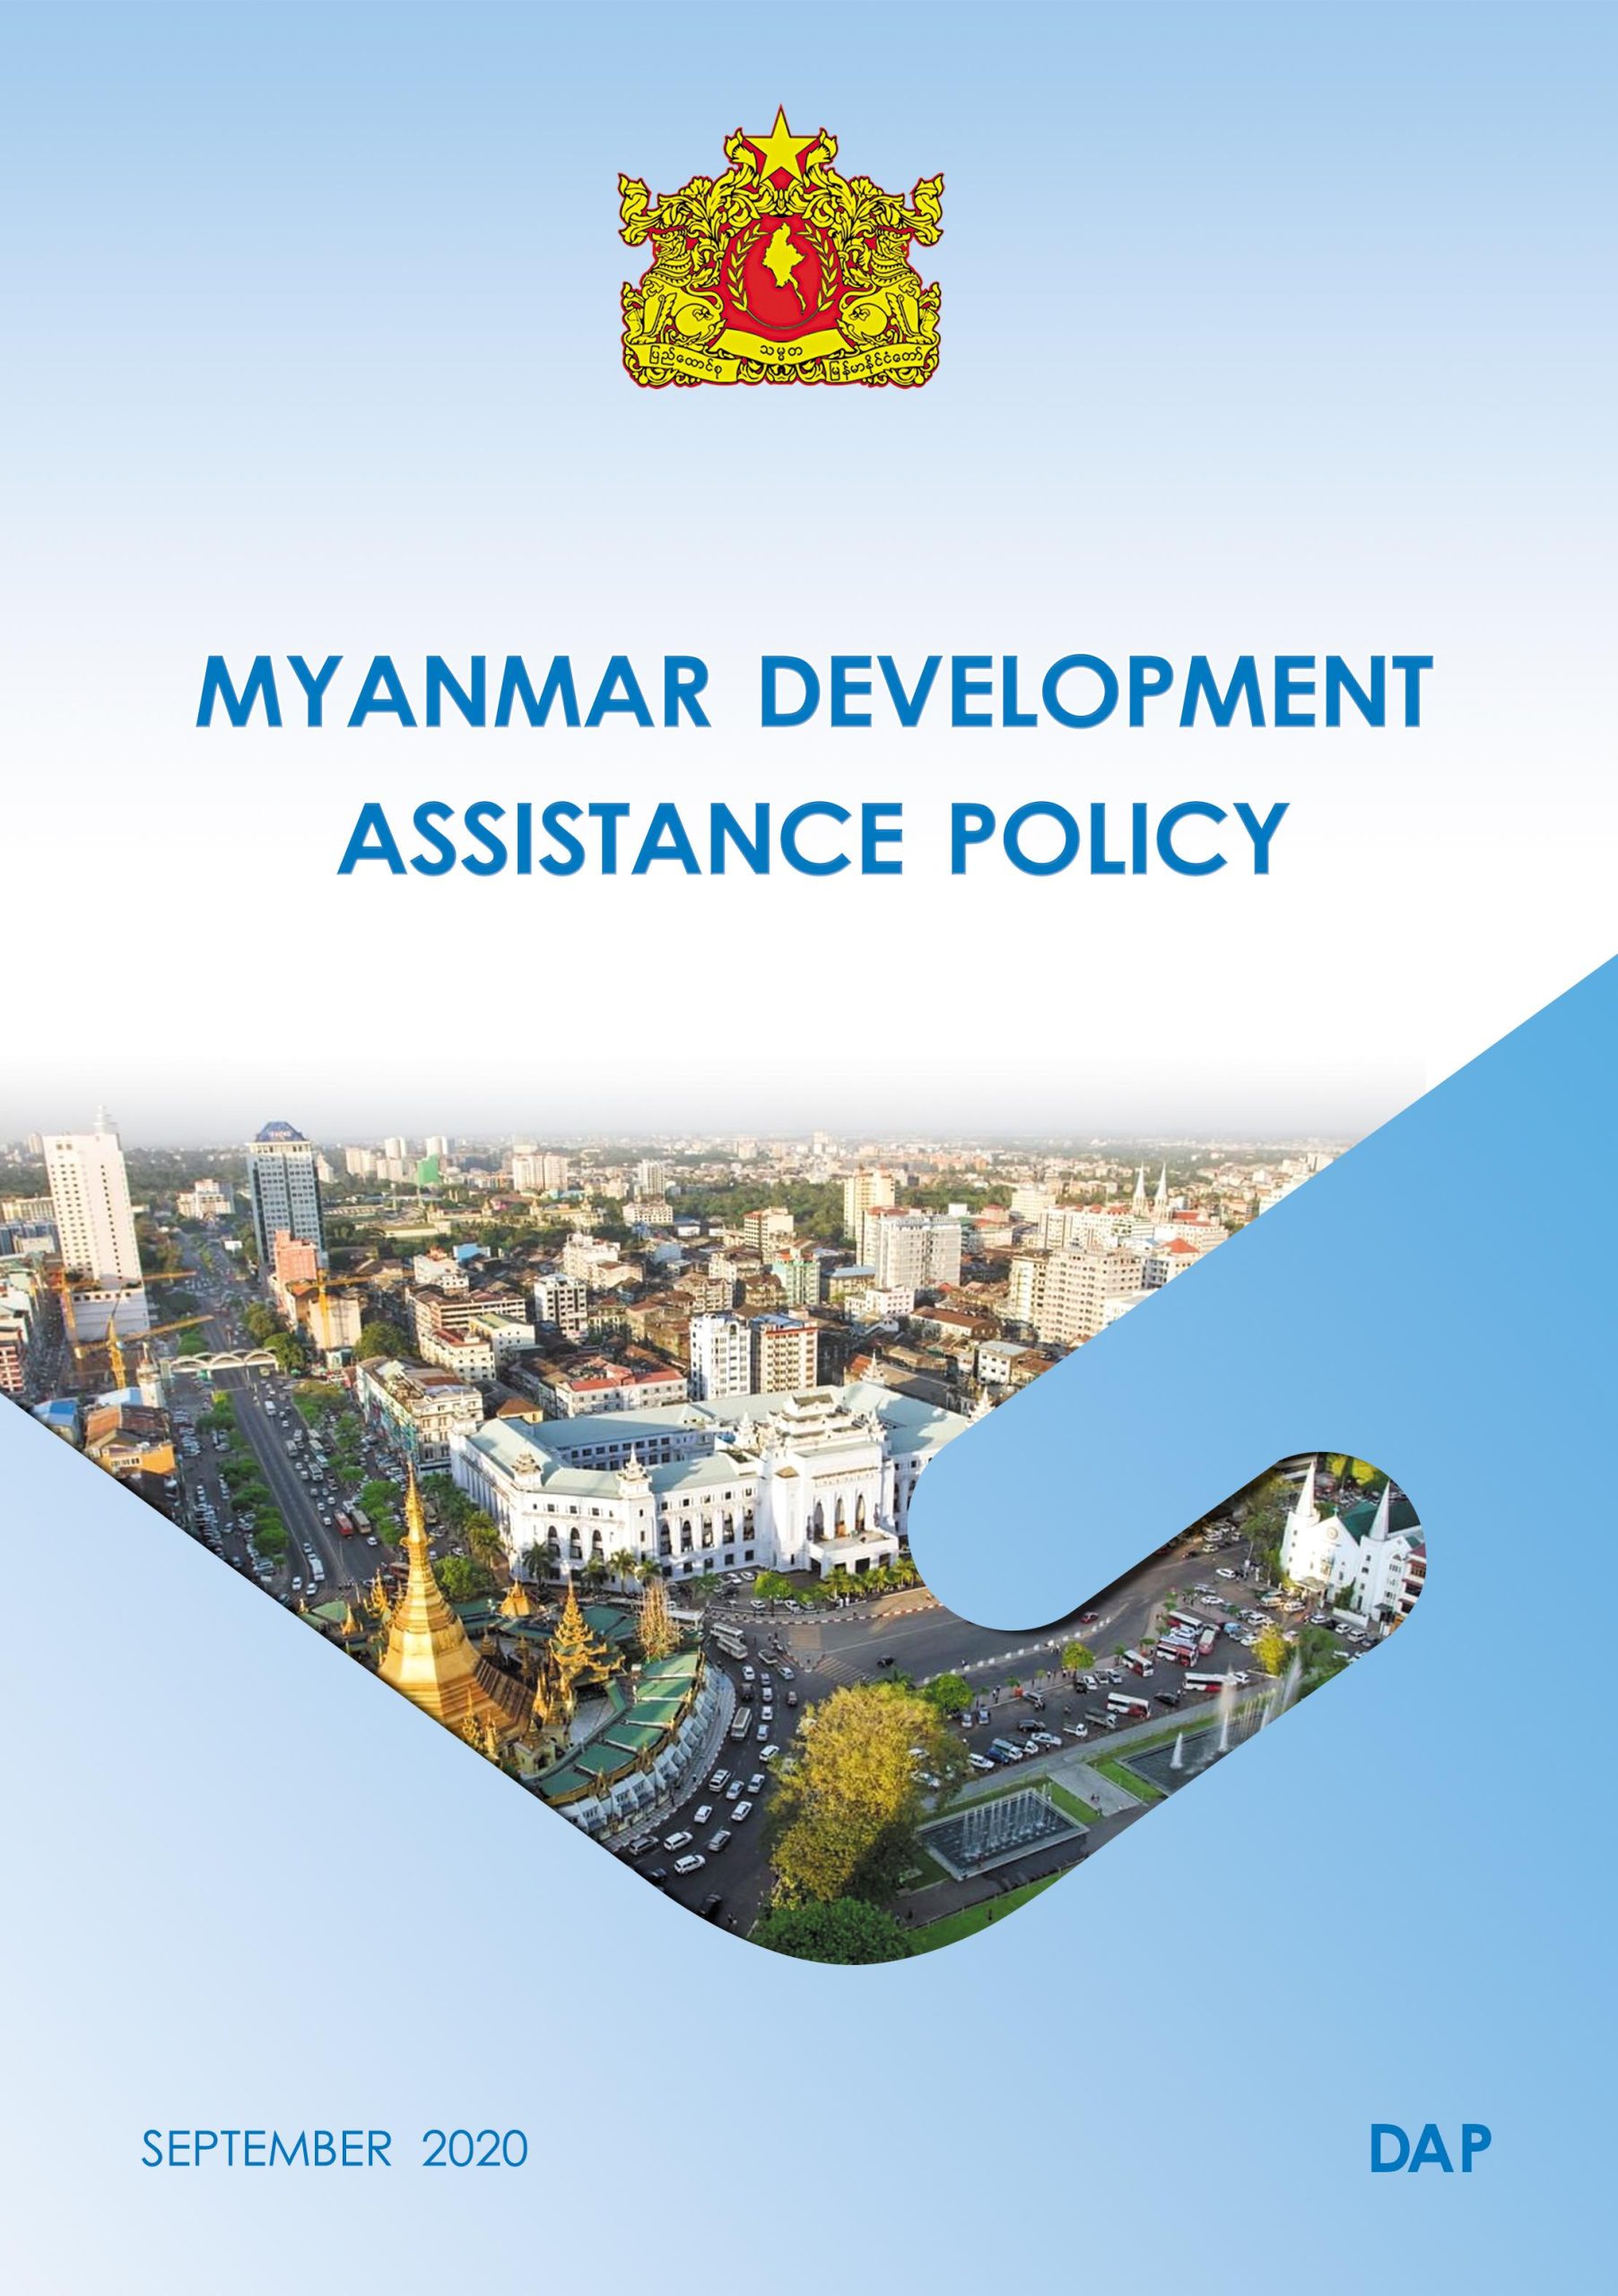 Latest Iteration of Myanmar Development Assistance Policy